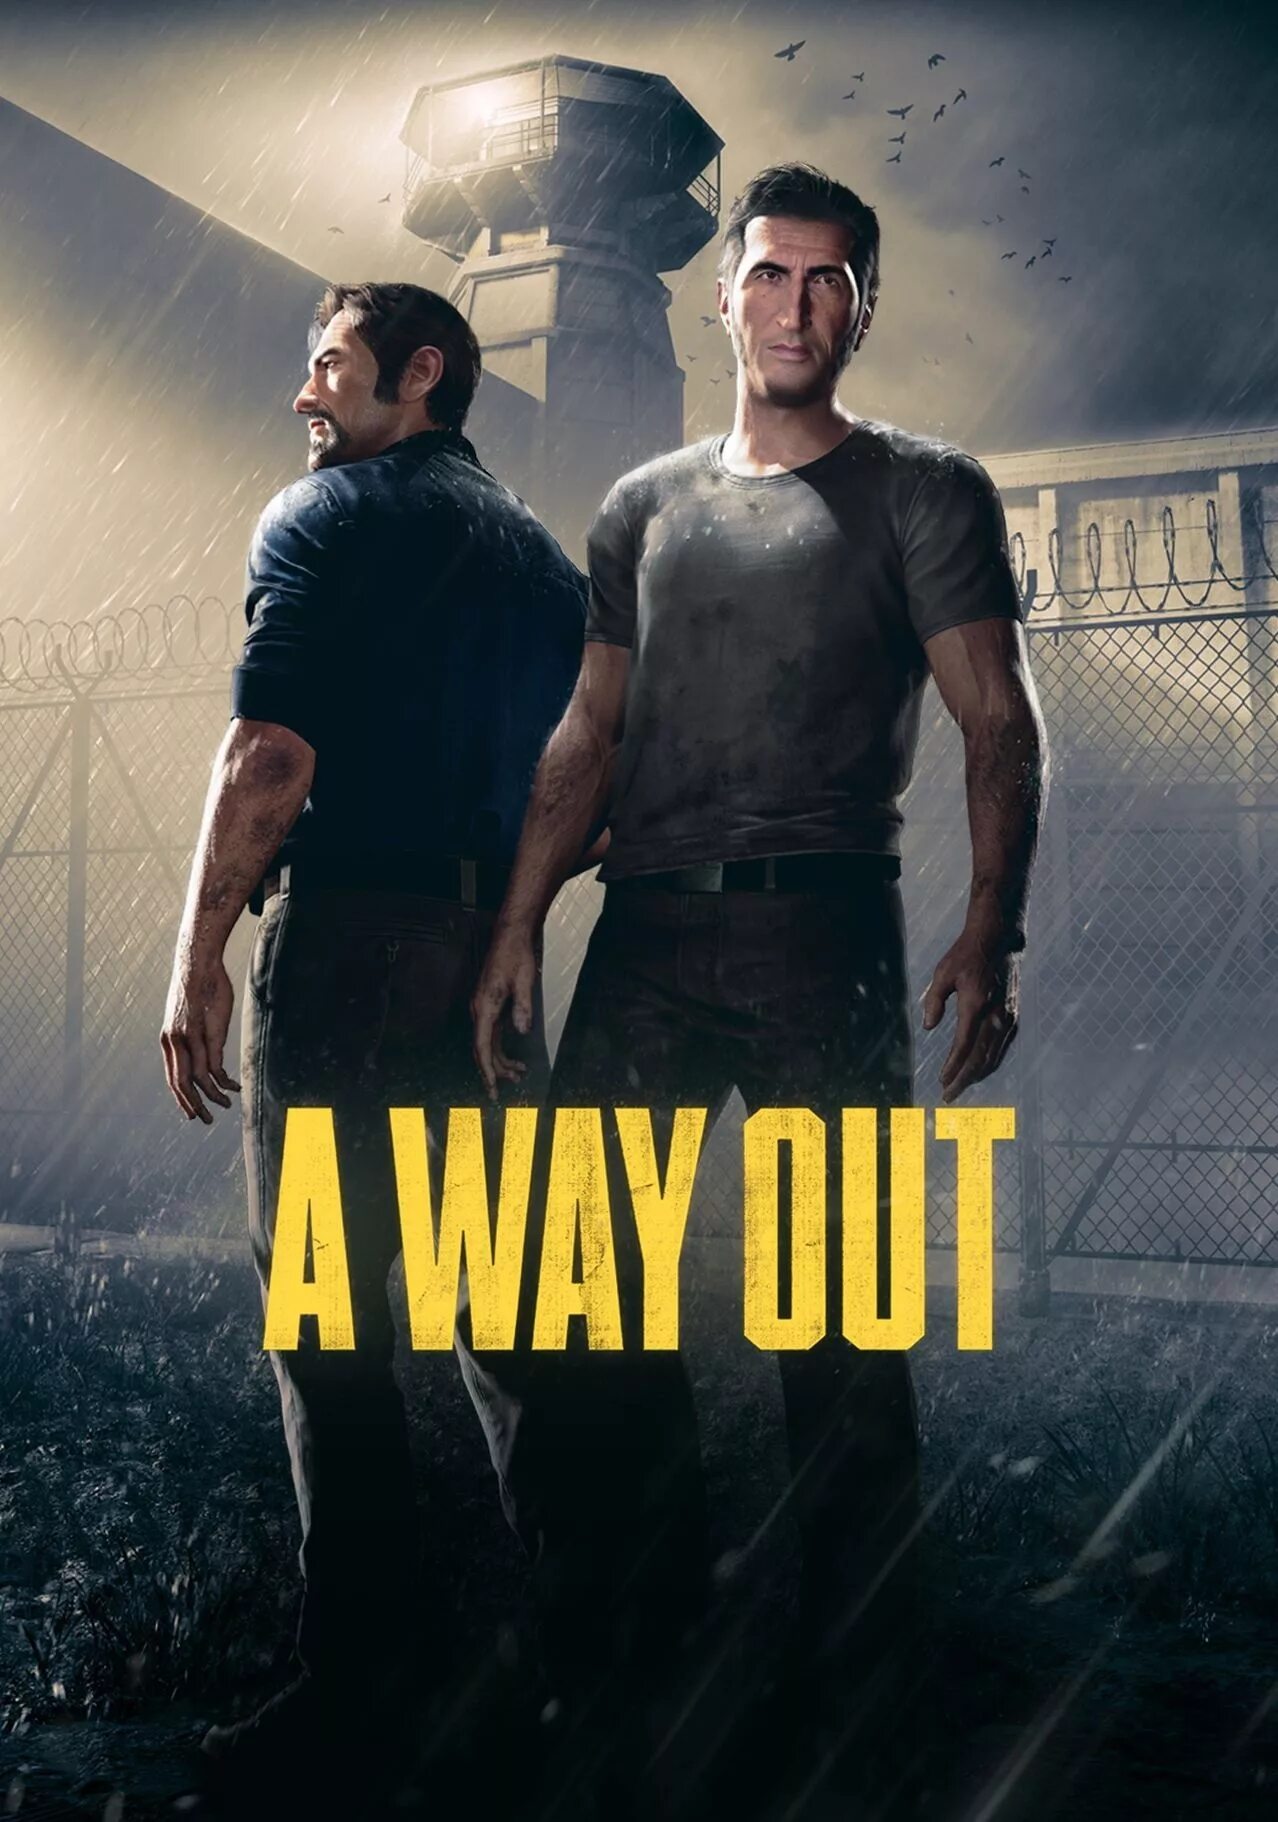 Way out игра. A way out ps4. A way out обложка игры. A way out (Xbox one). A way out game